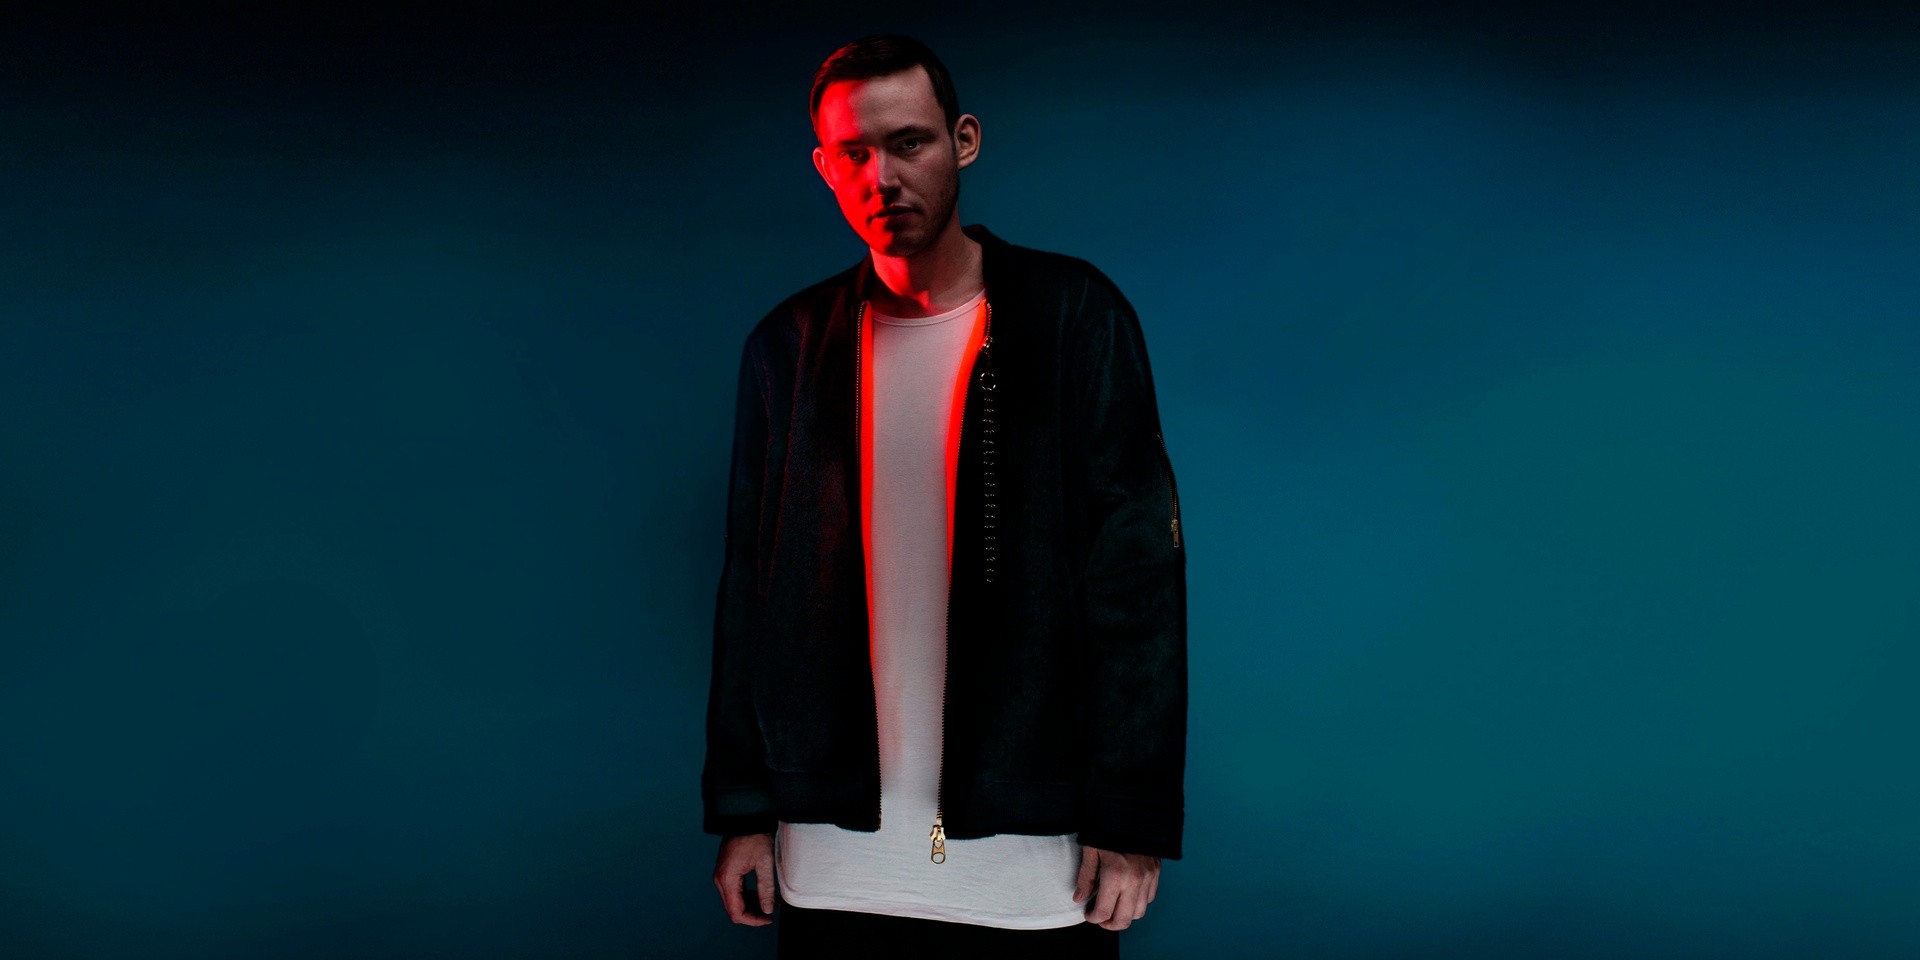 Cherry Discotheque brings Hudson Mohawke back to Singapore